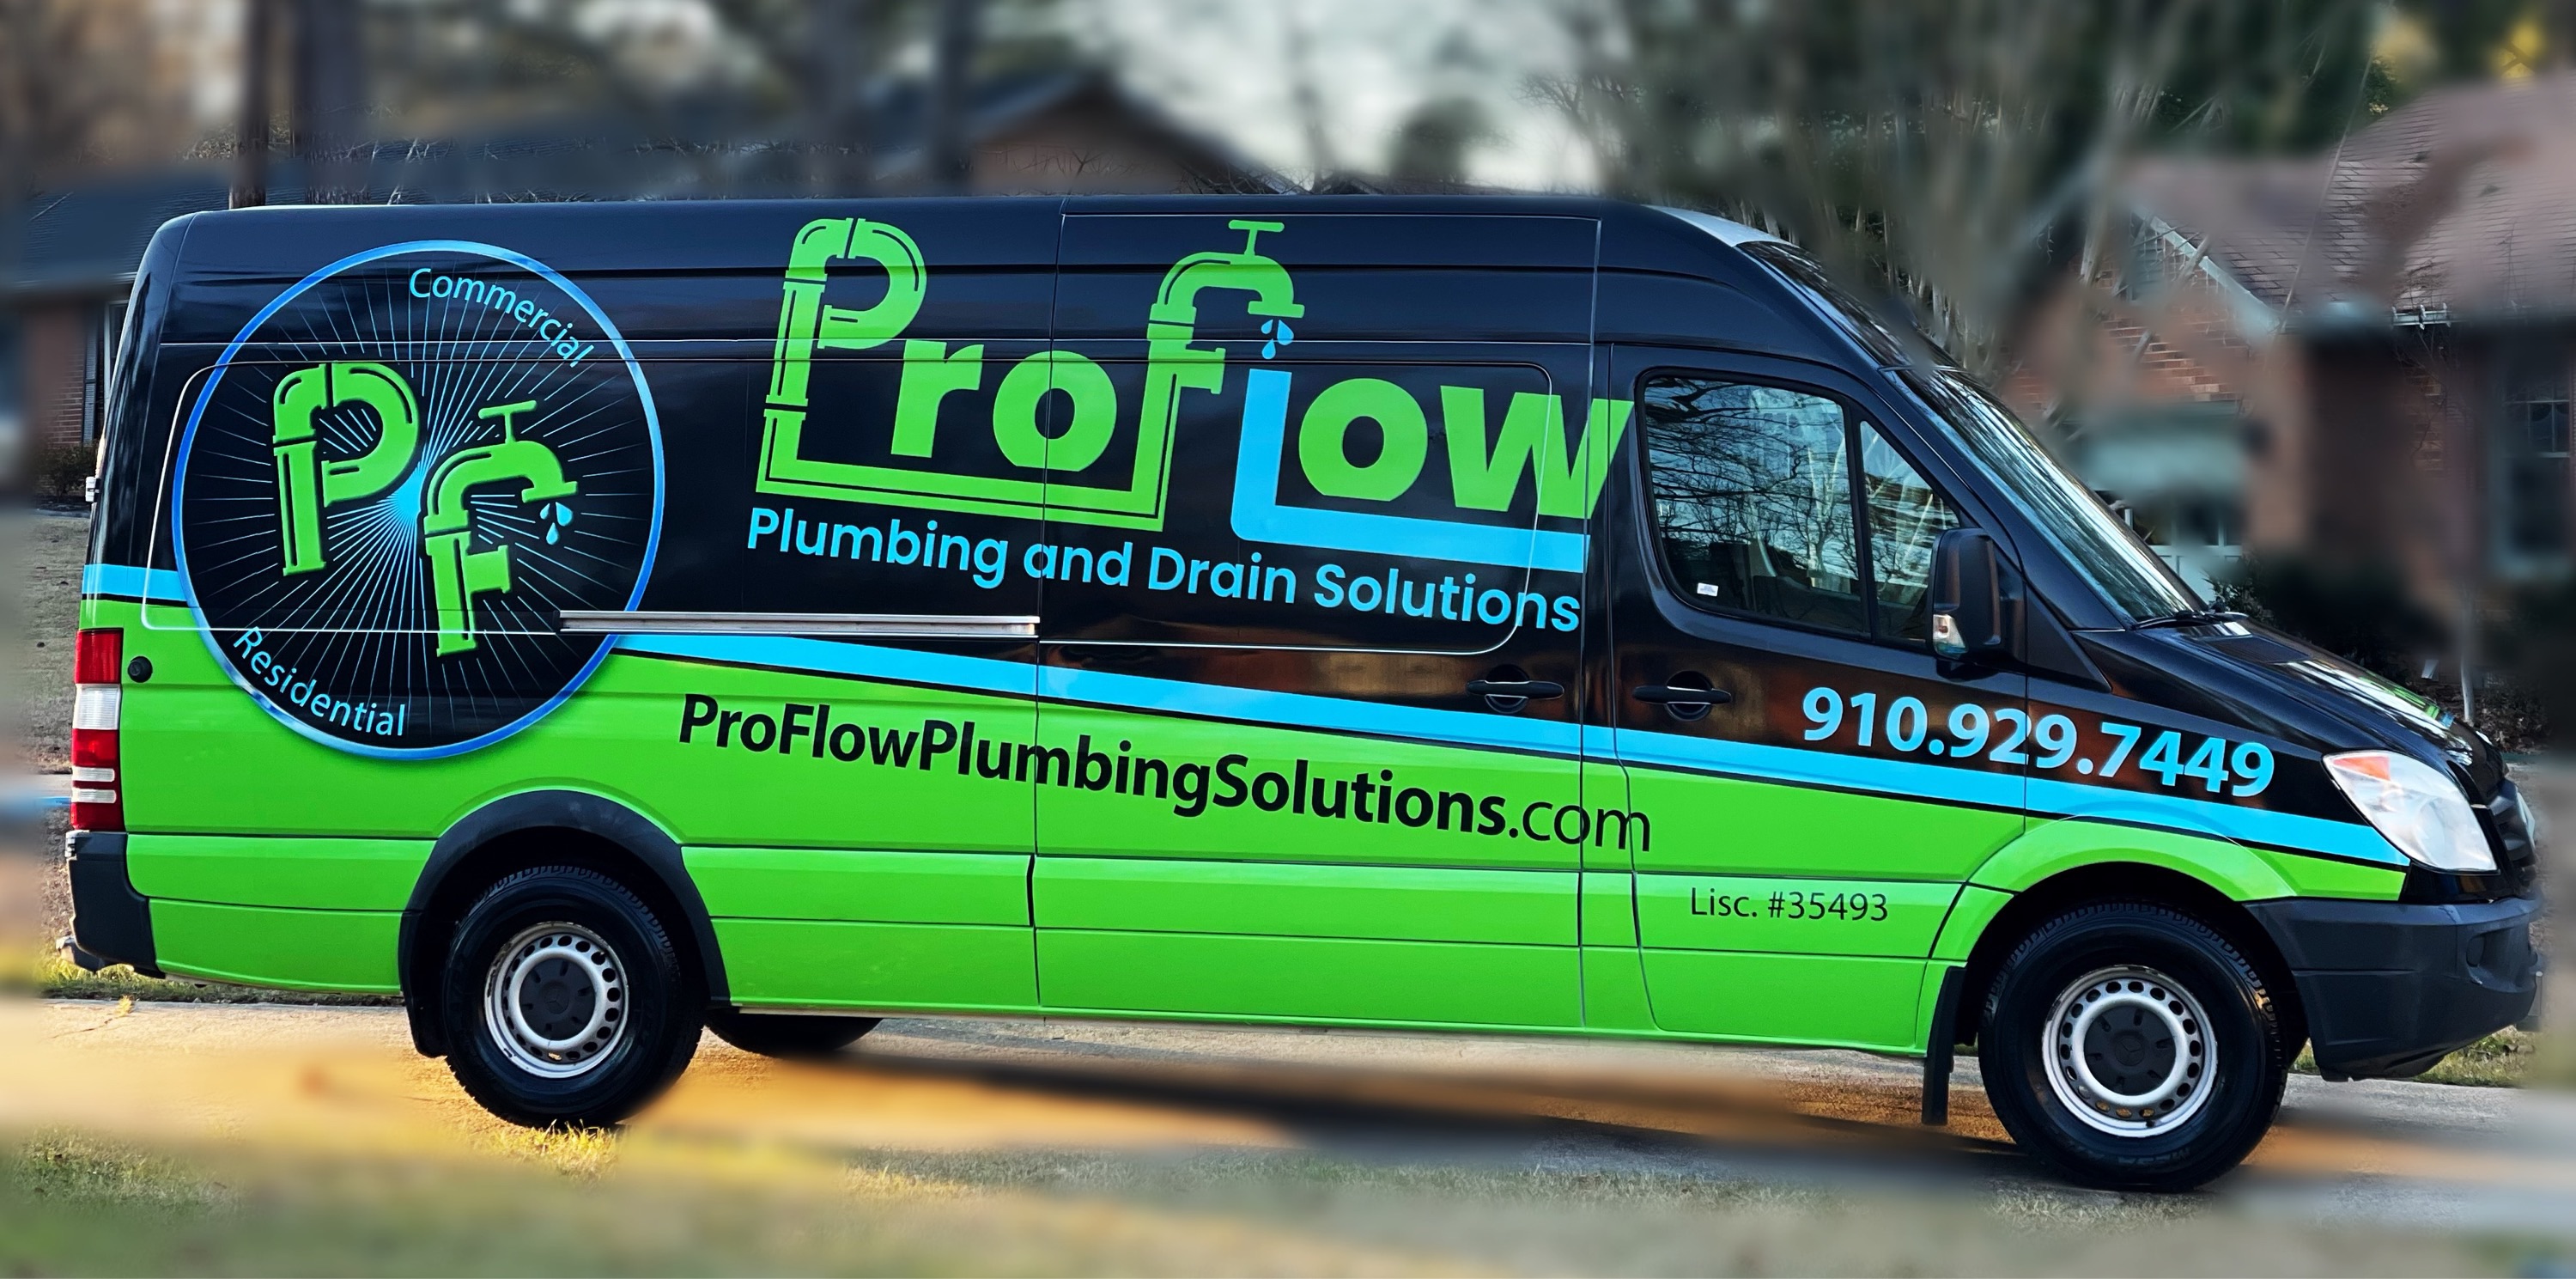 Proflow Plumbing and Drain Solutions Logo